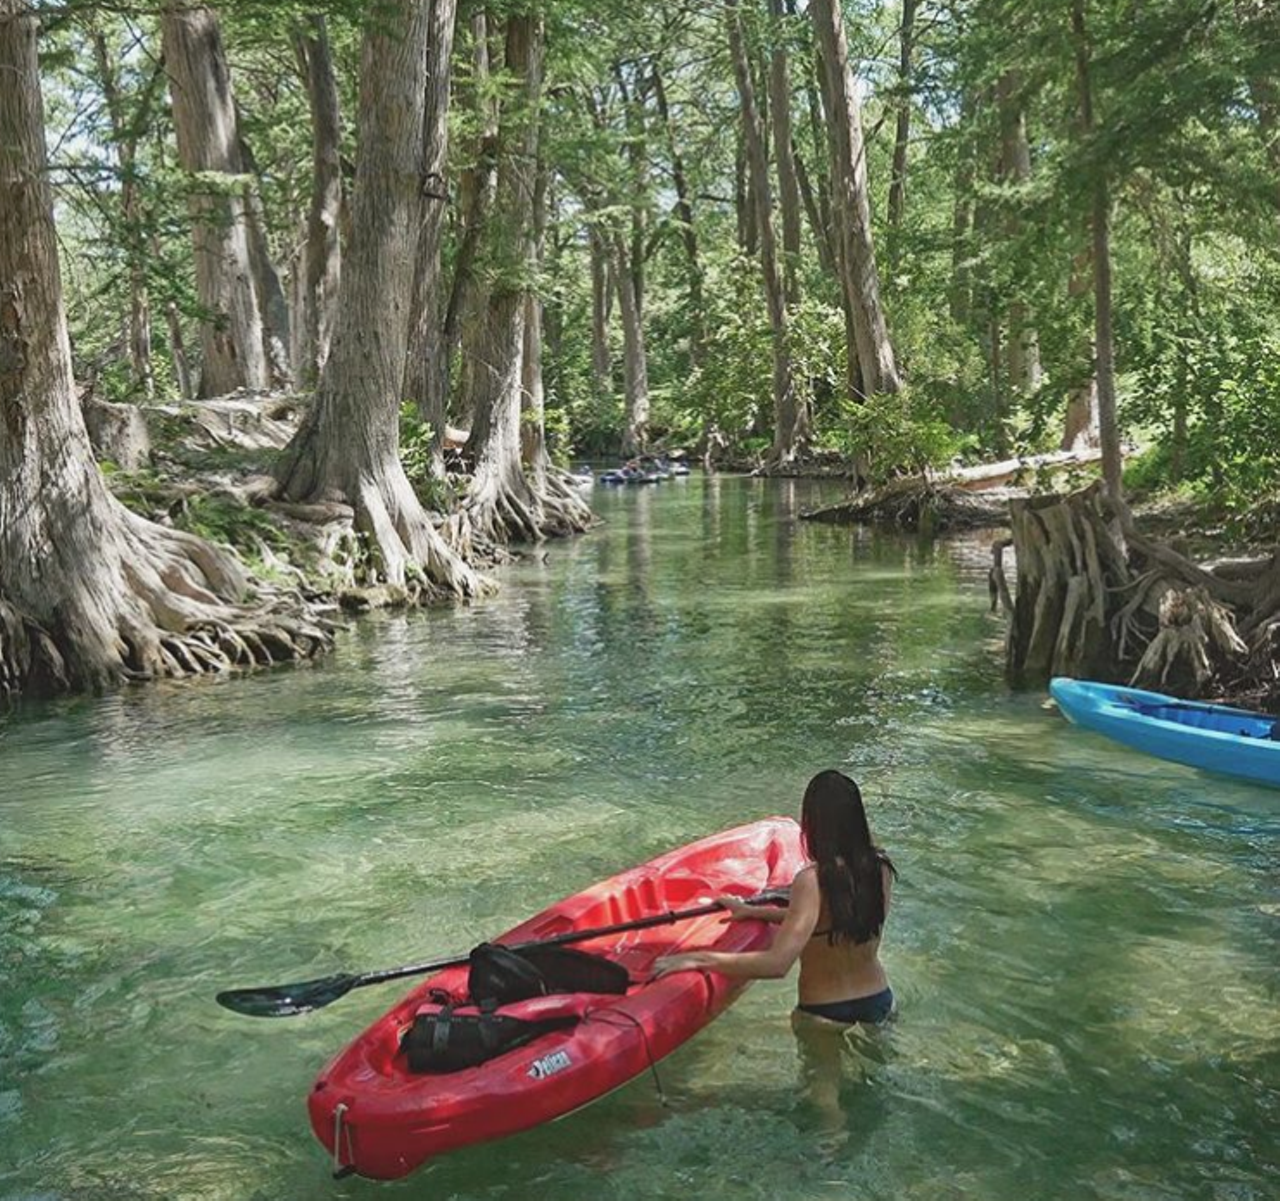 Right in San Antonio’s backyard is the Medina River, a refreshing body of water that gives the pleasure of Hill Country watering holes without going the distance. Surrounding the water is a 511-acre park that also has seven miles of trails.
Photo via Instagram / jawadmiklaszewicz